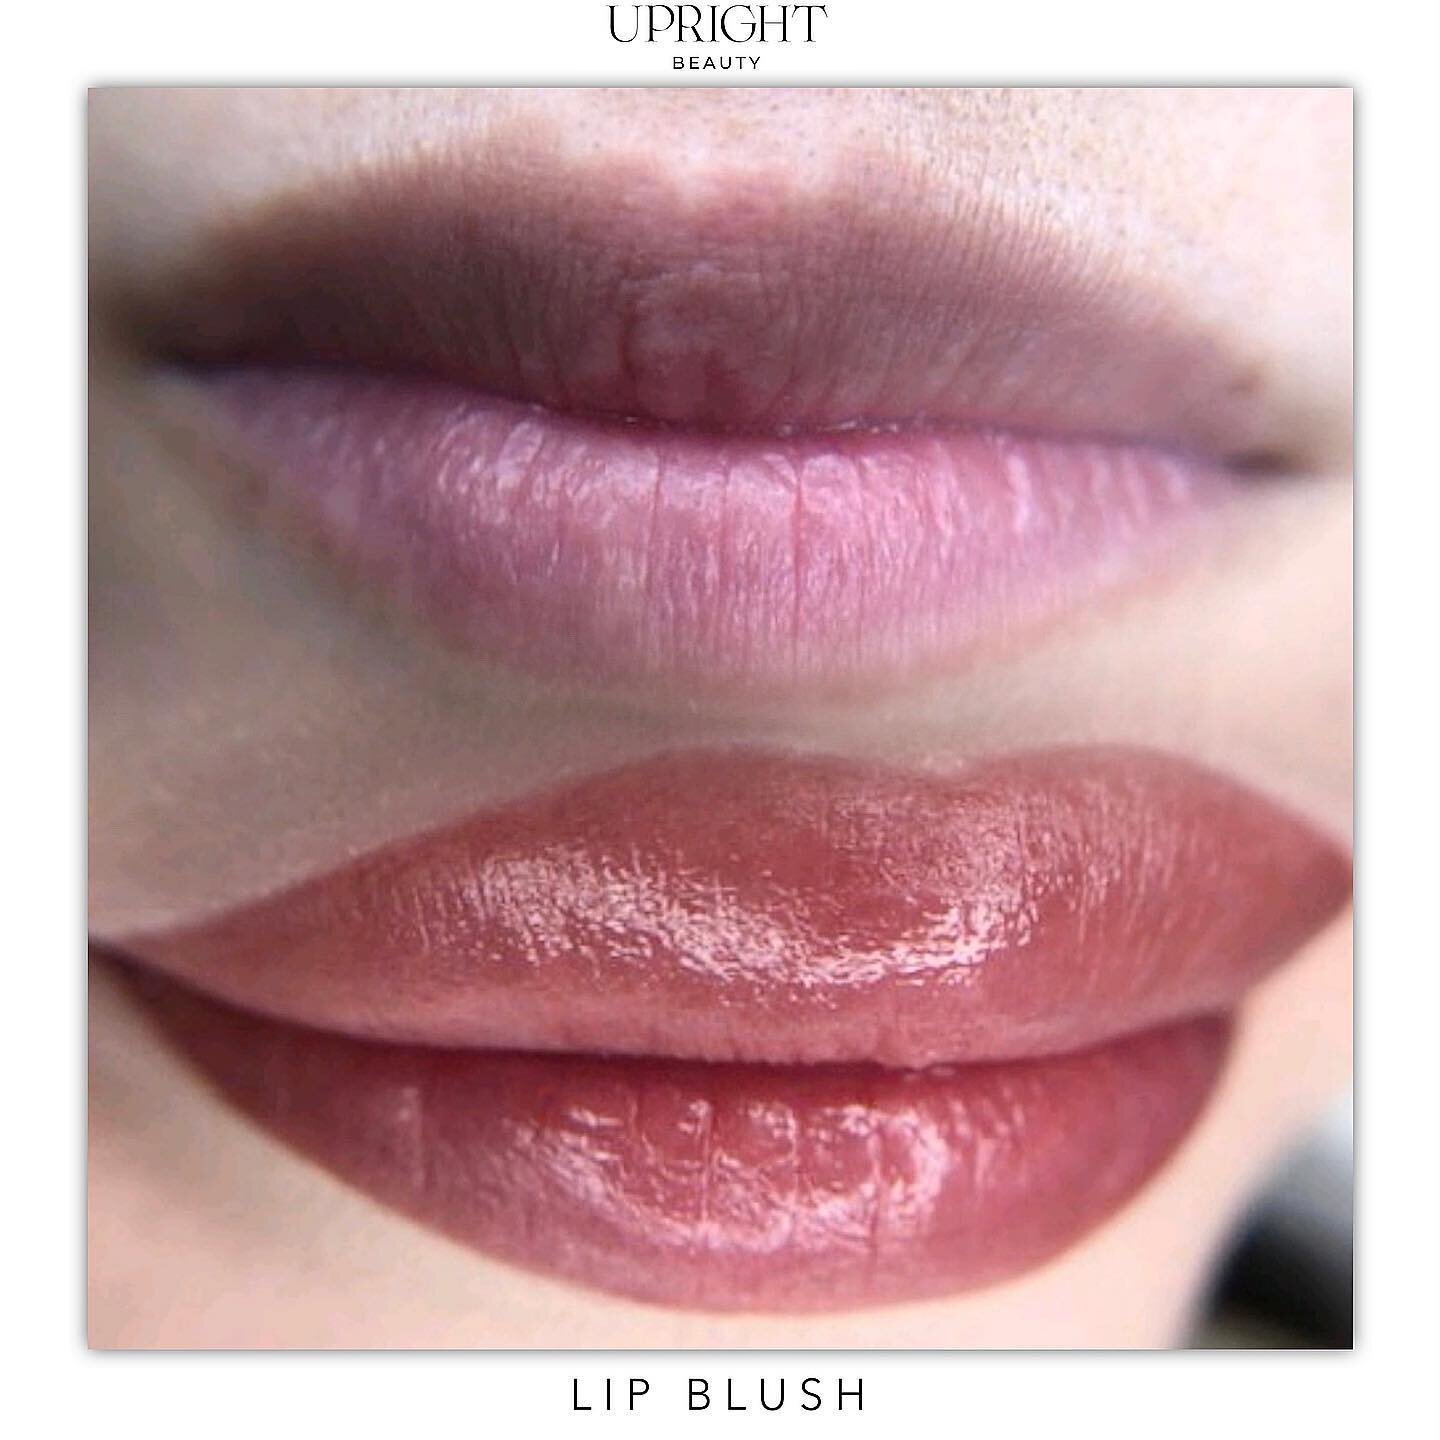 🥳 New Service and New Artist Alert! 🥳 We are excited to announce that our new artist, Maria, will be offering LIP BLUSH 👄 She has gone through a rigorous training since February, and we are excited to bring this to our beautiful clients. She is st